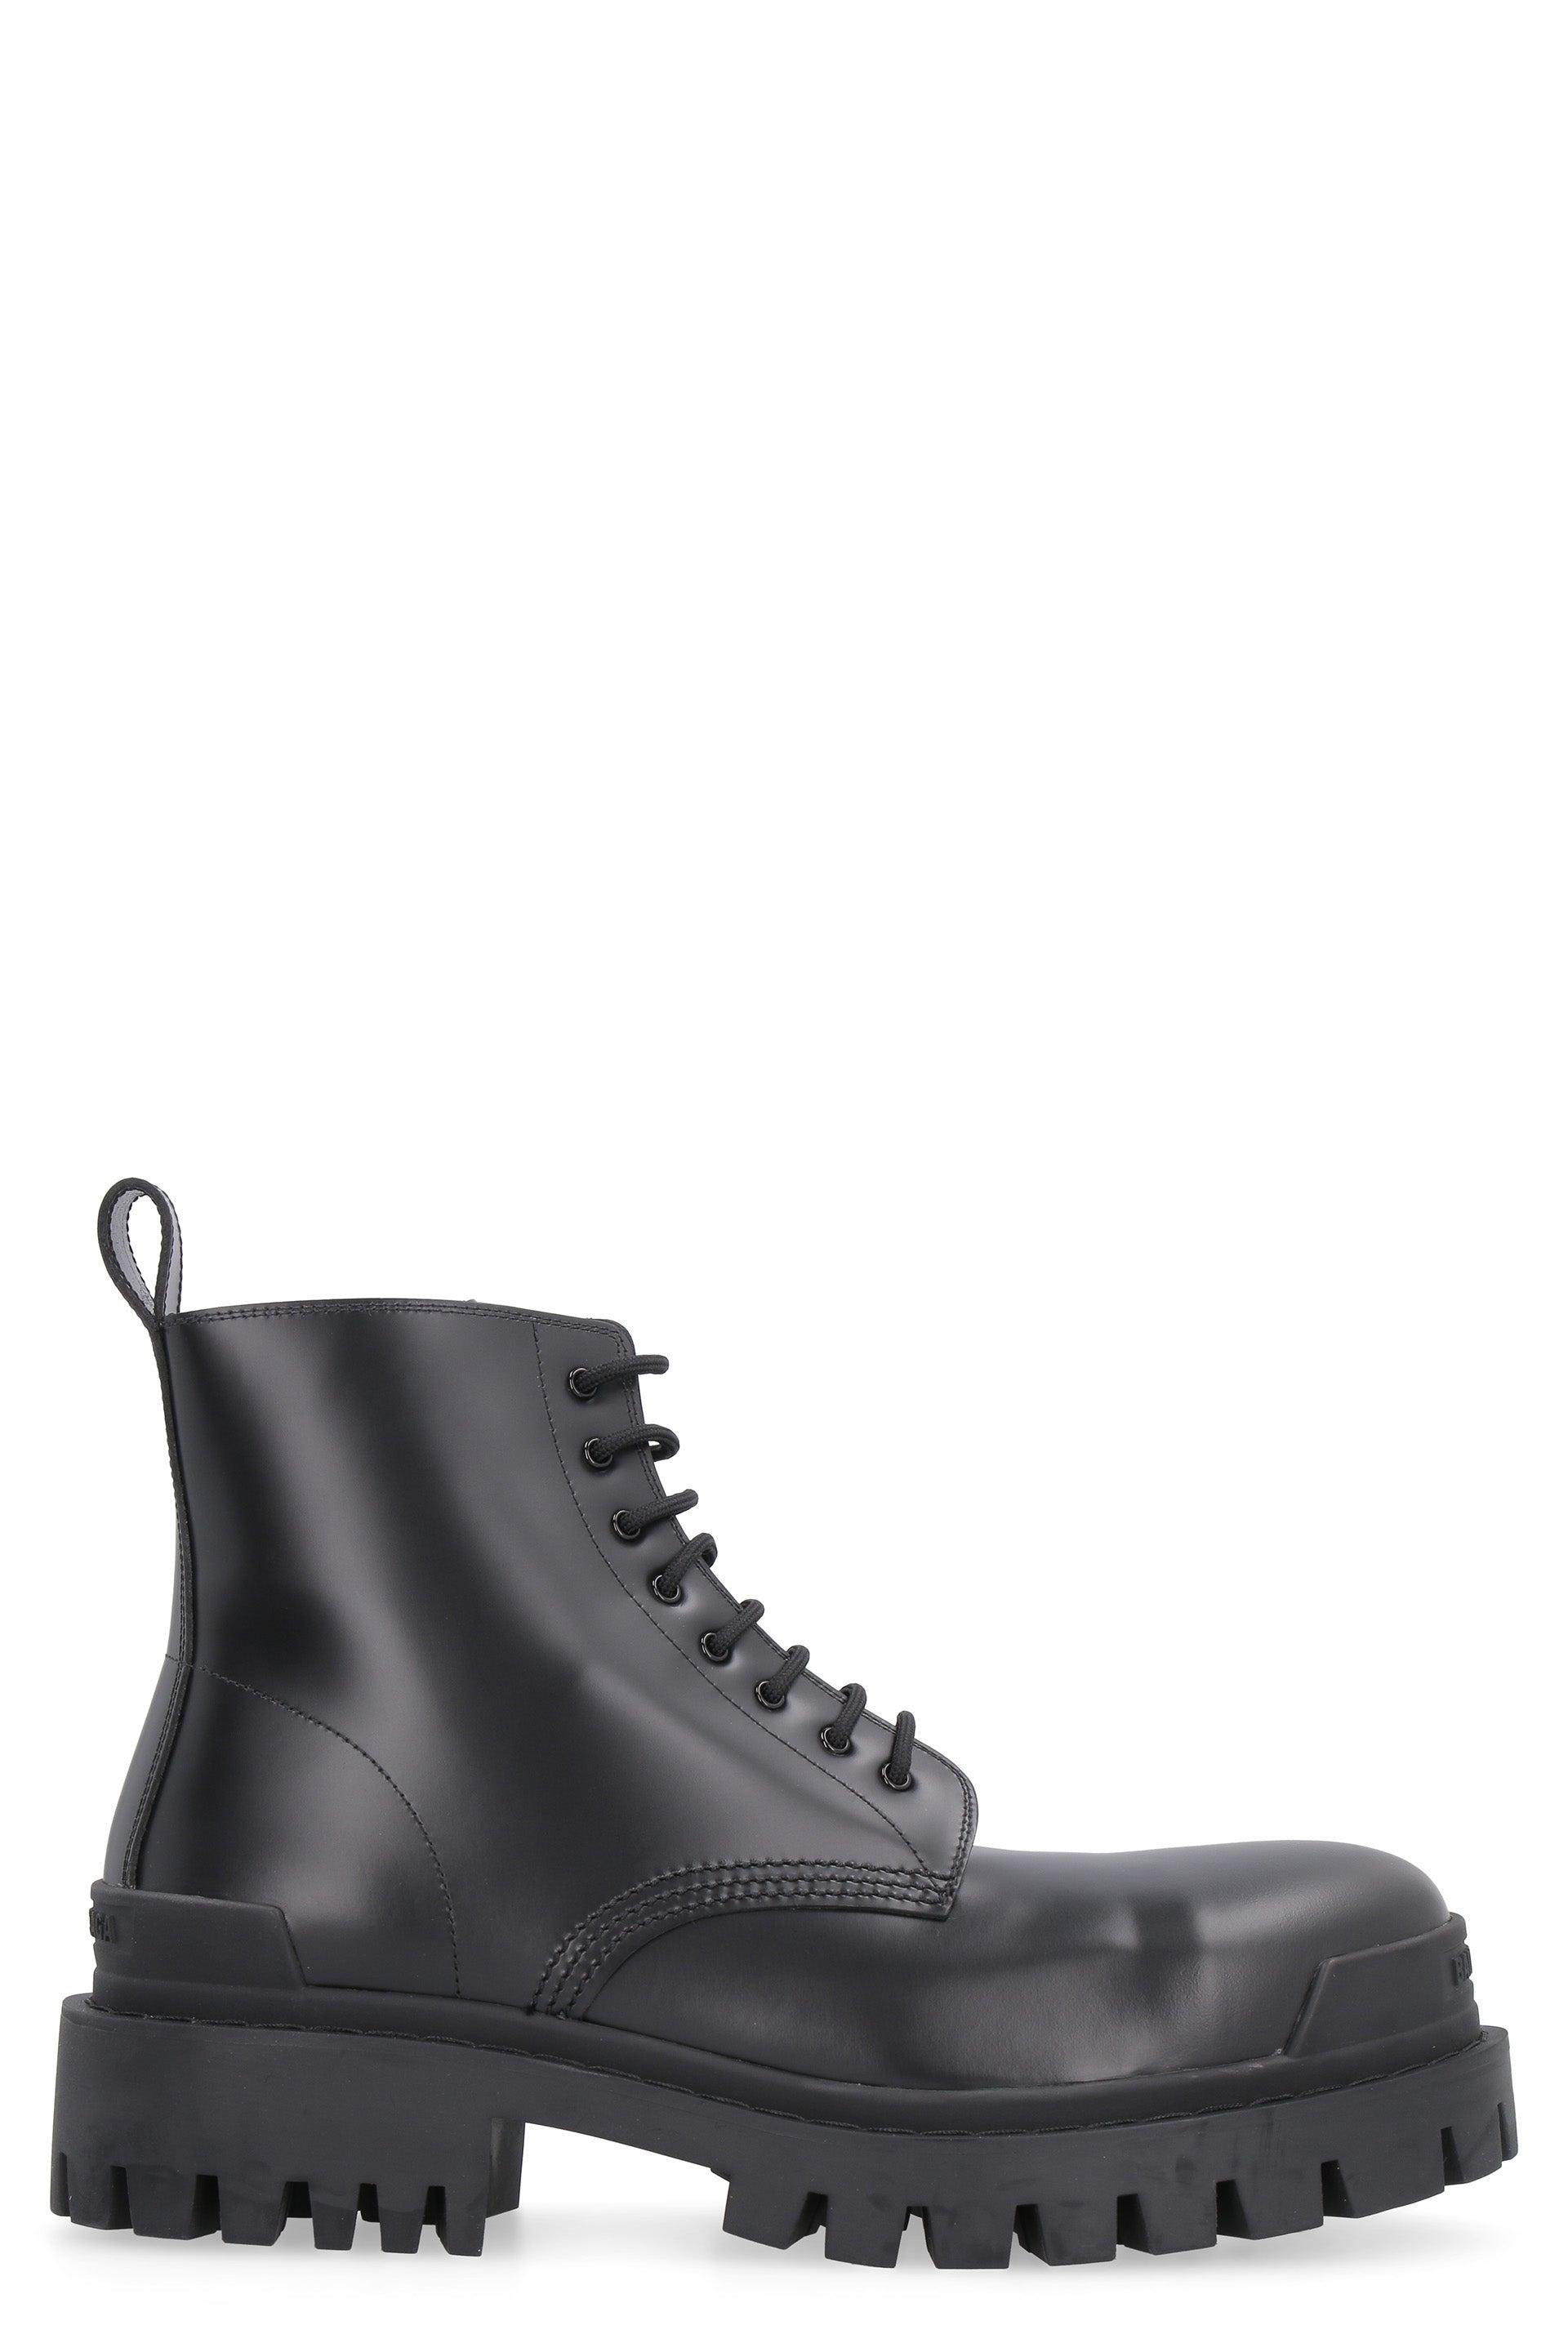 Balenciaga Strike Leather Combat Boots in Black for Men - Save 15% | Lyst